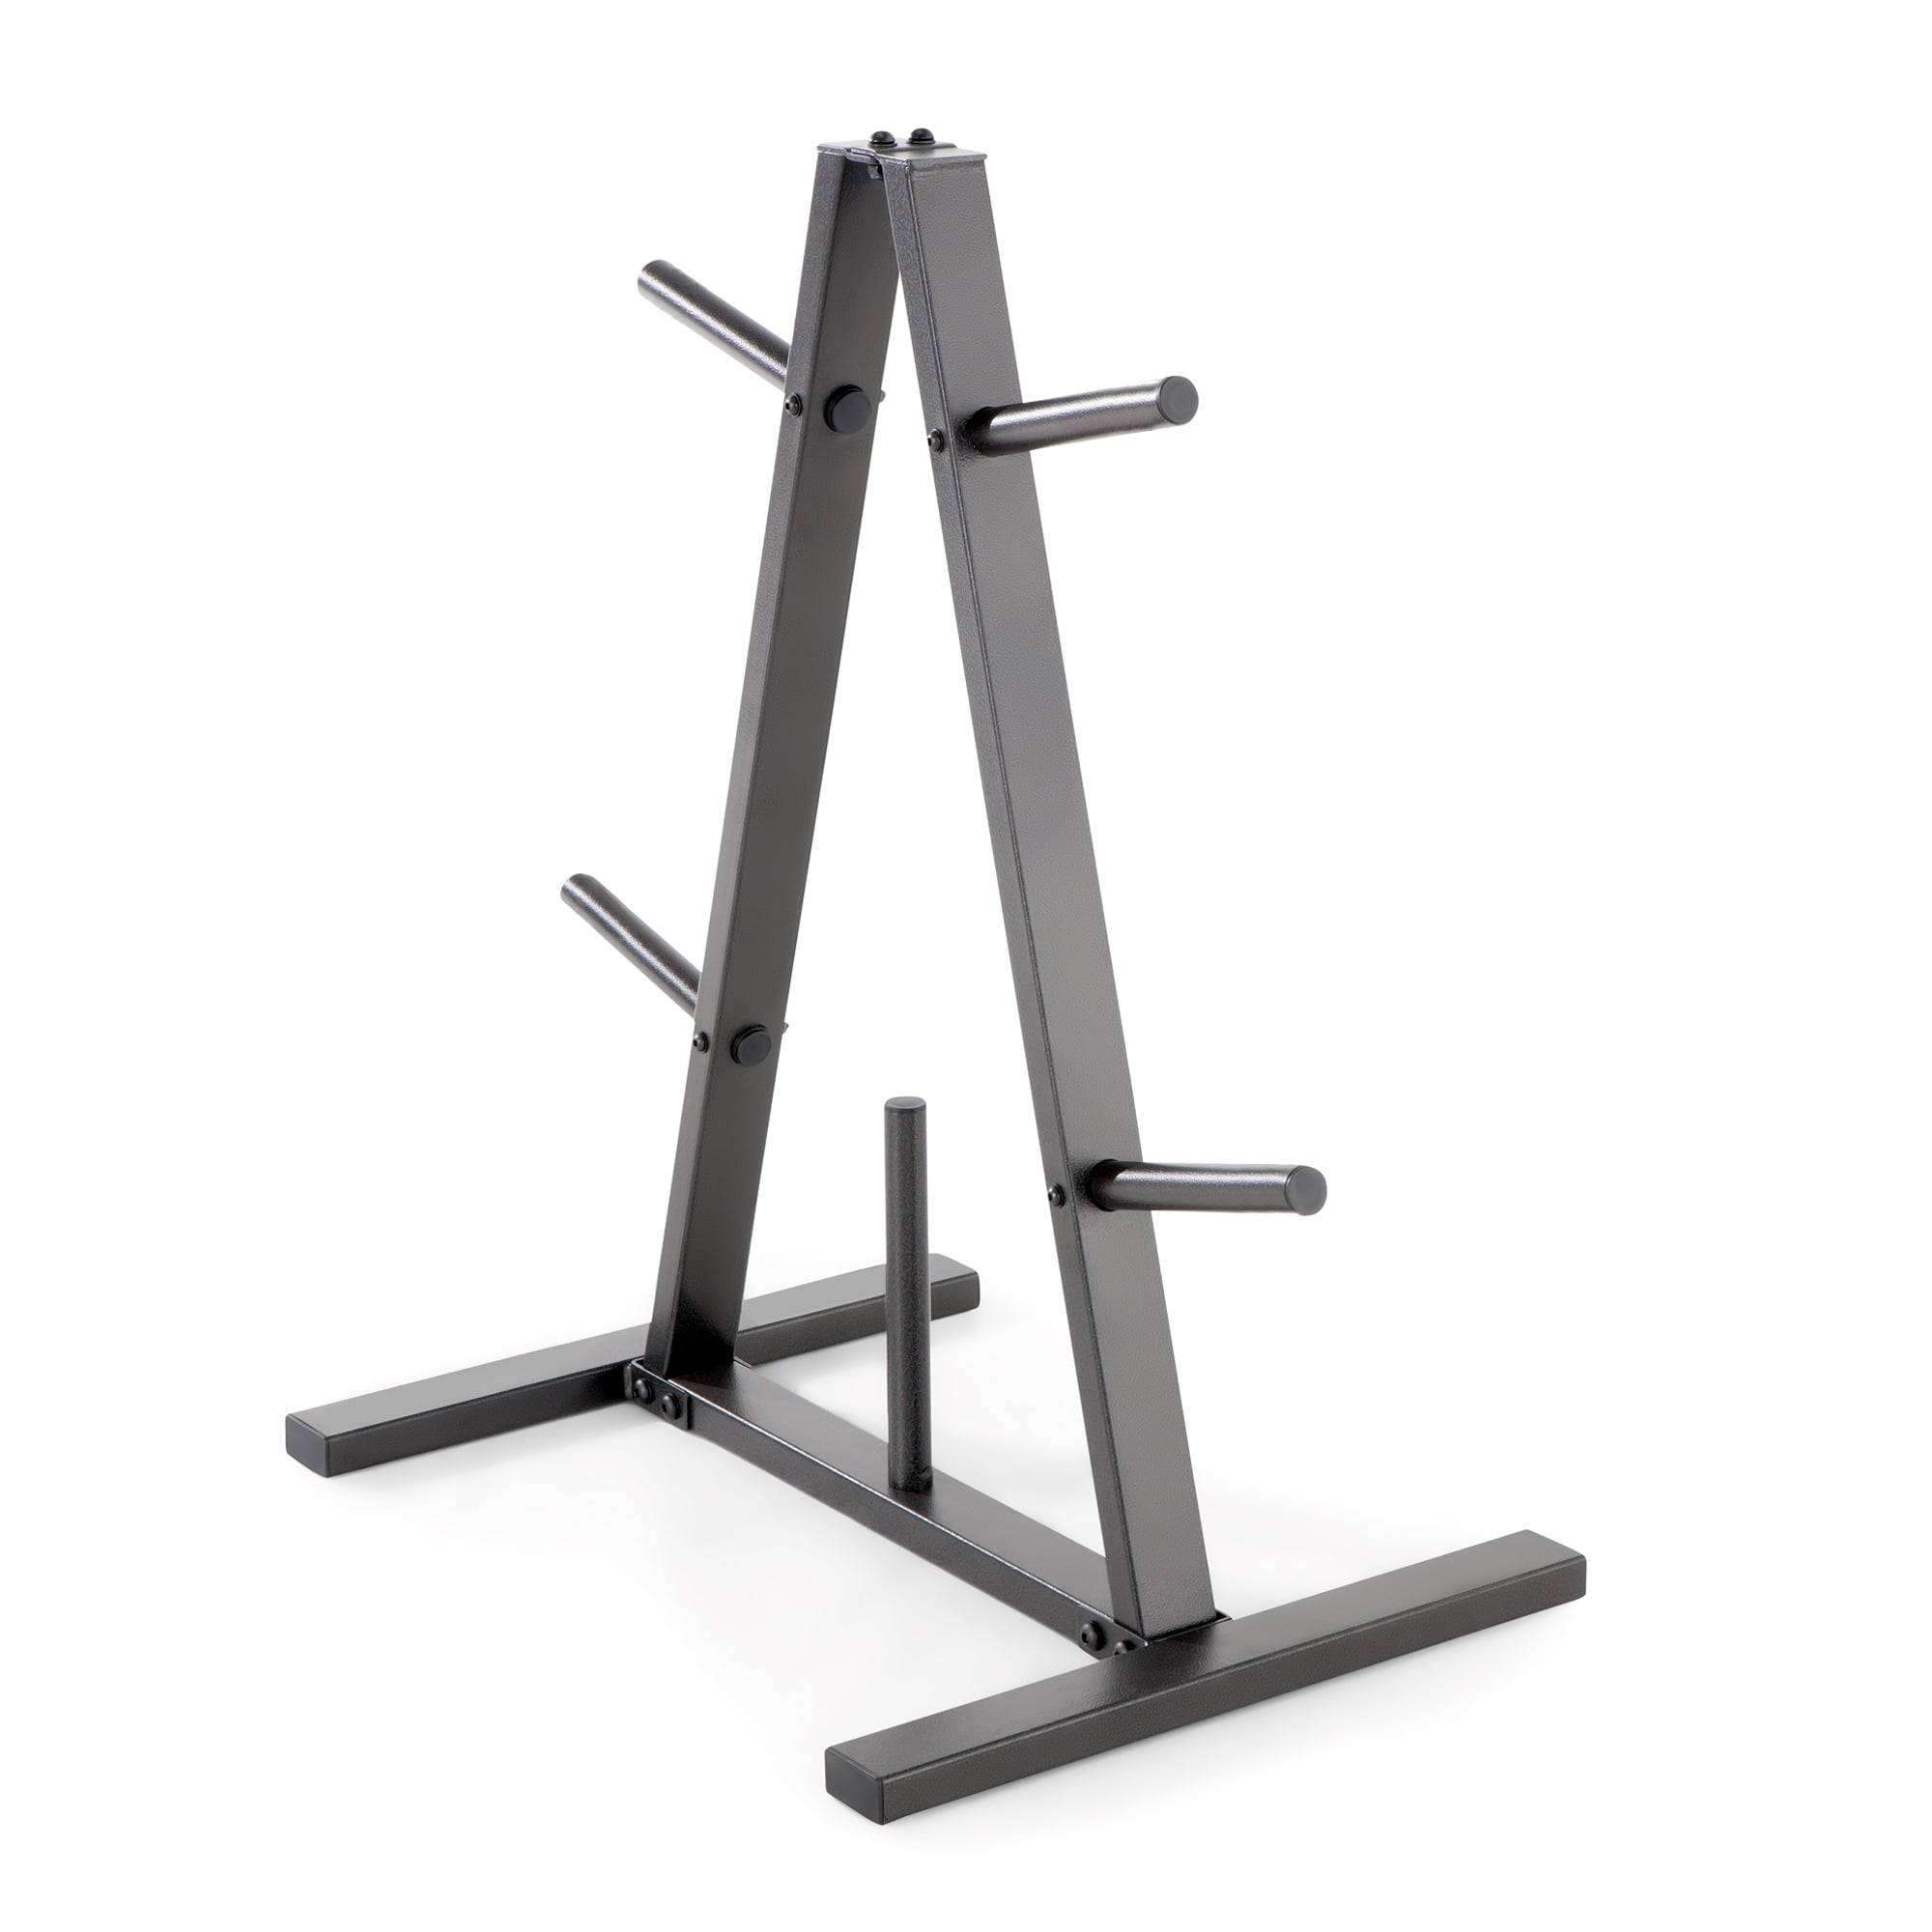 Free-Standing Sturdy Plate Racks Stand with 6 Pegs for Weighted Plates and Barbells Gym Equipment Accessories Weight Rack and 2 Bar Holder for 2” Olympic Plates by D1F Stores Up To 850 lb